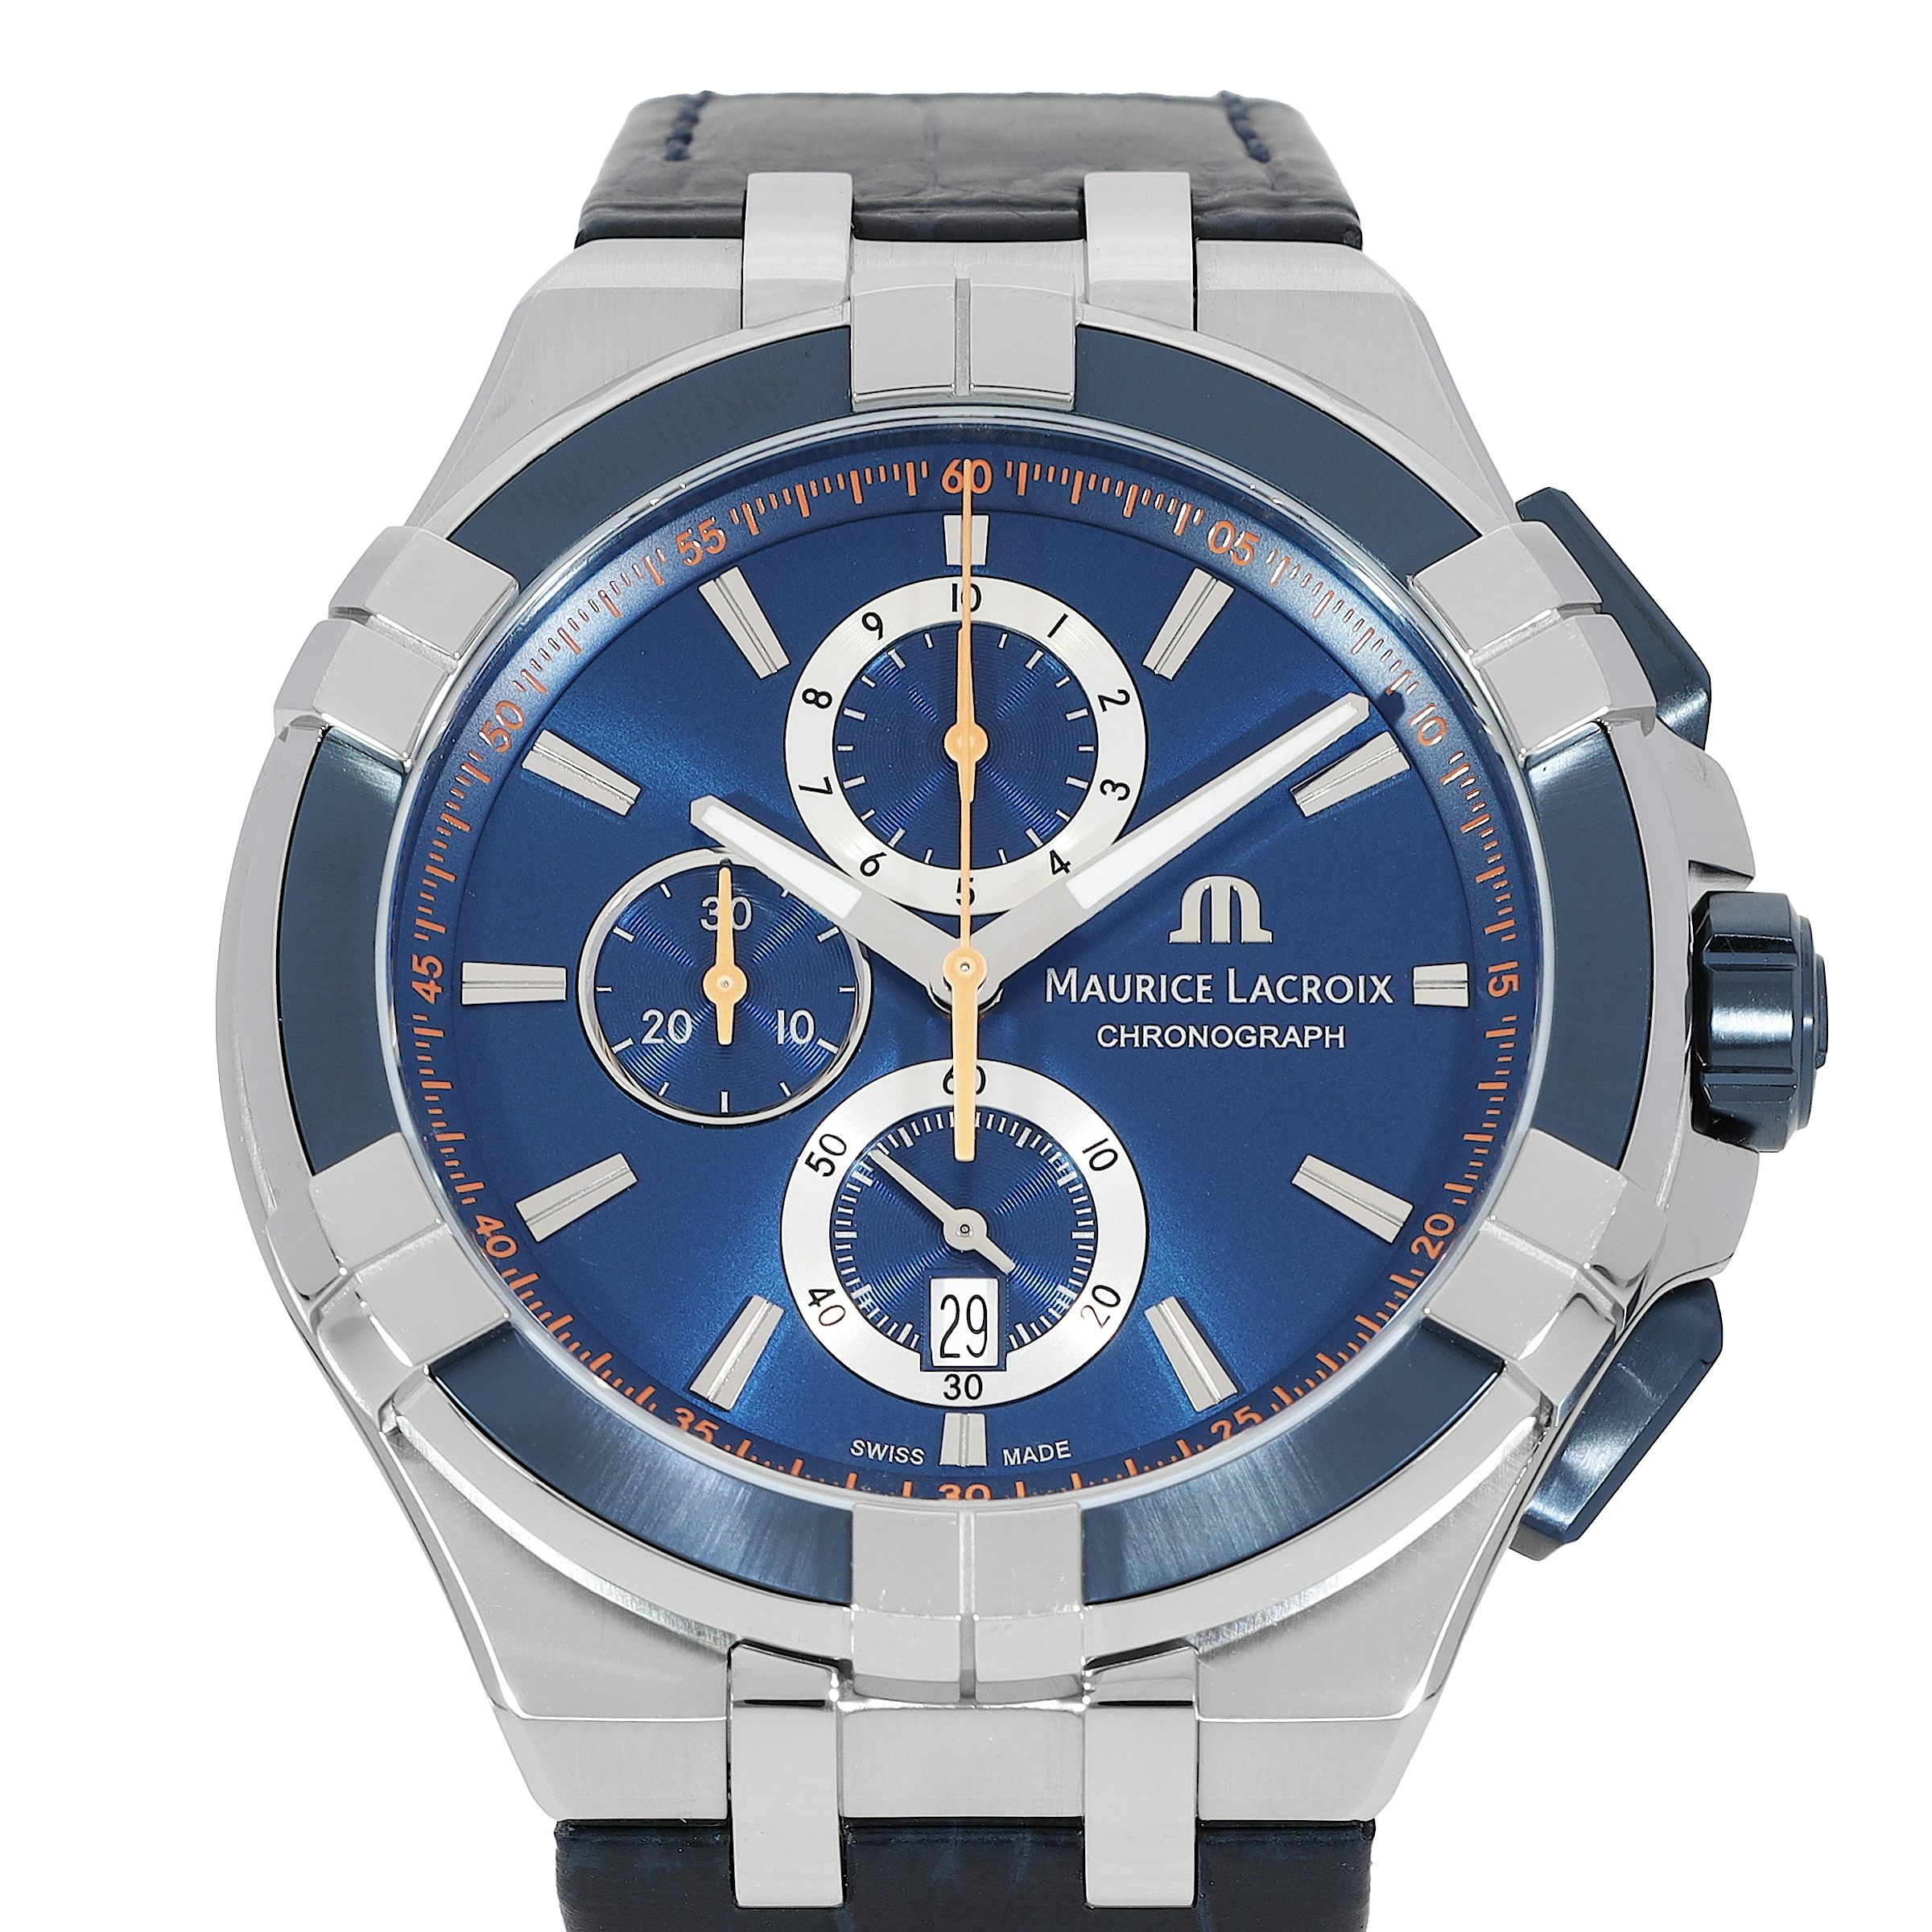 CHRONEXT in Aikon Lacroix Maurice Stainless AI1018-SS001-432-4 Steel |